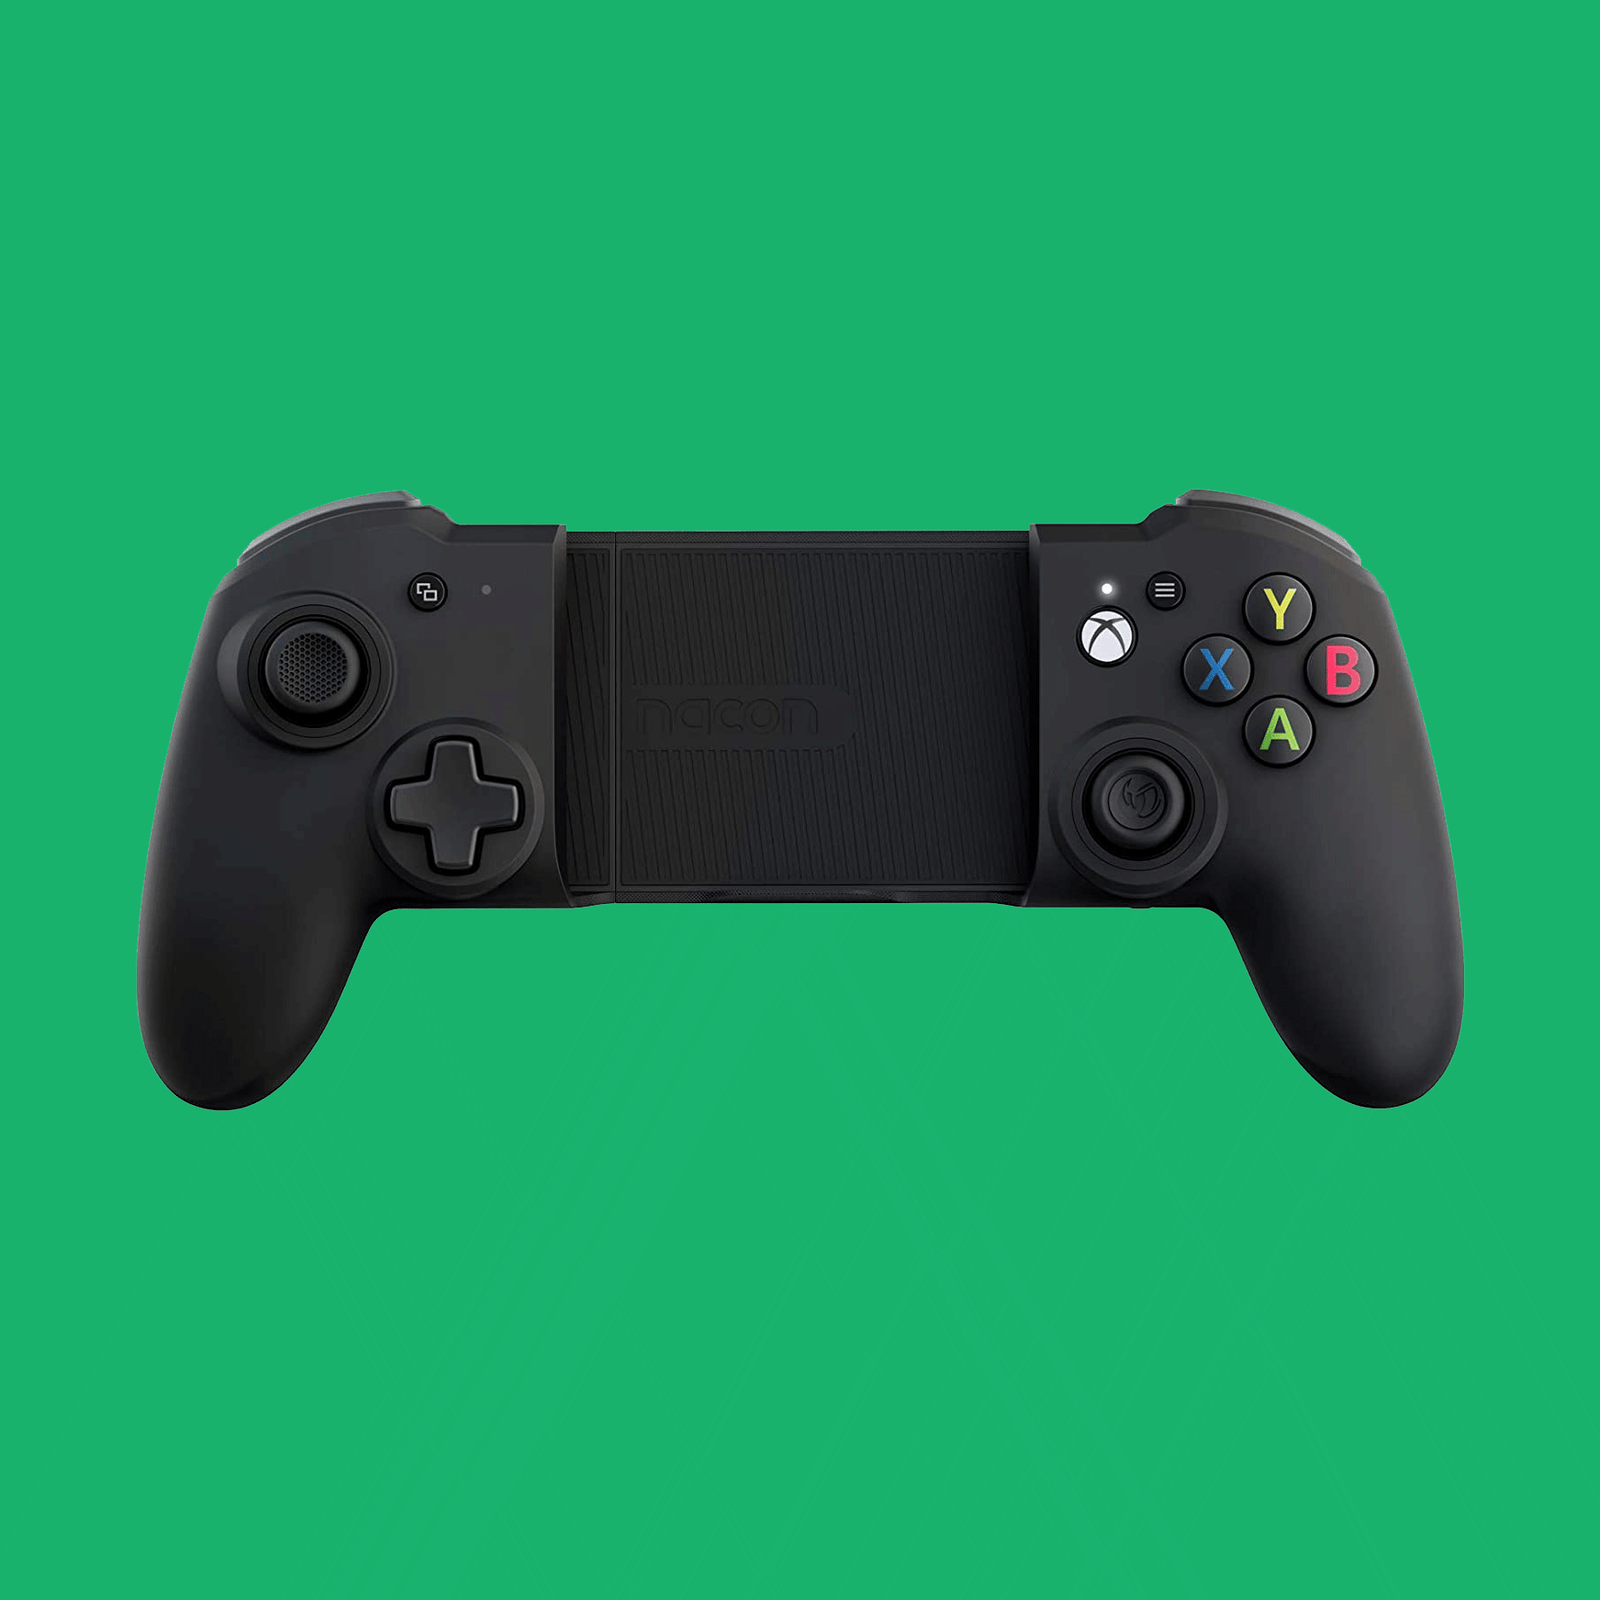 Nacob MGX Pro Controller for mobile devices